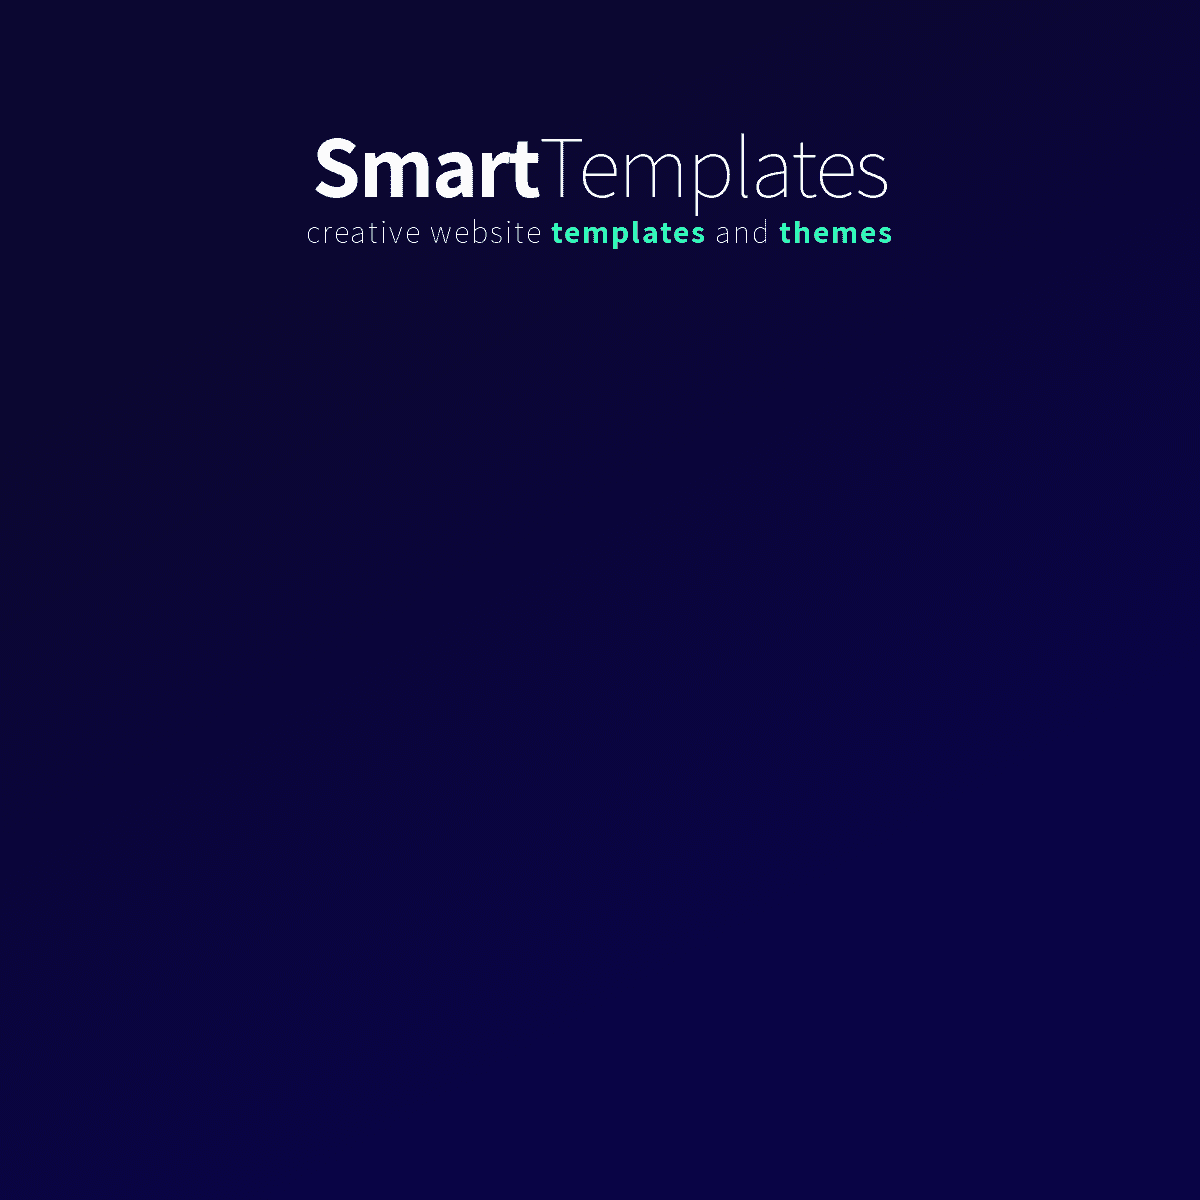 A complete backup of smarttemplates.net